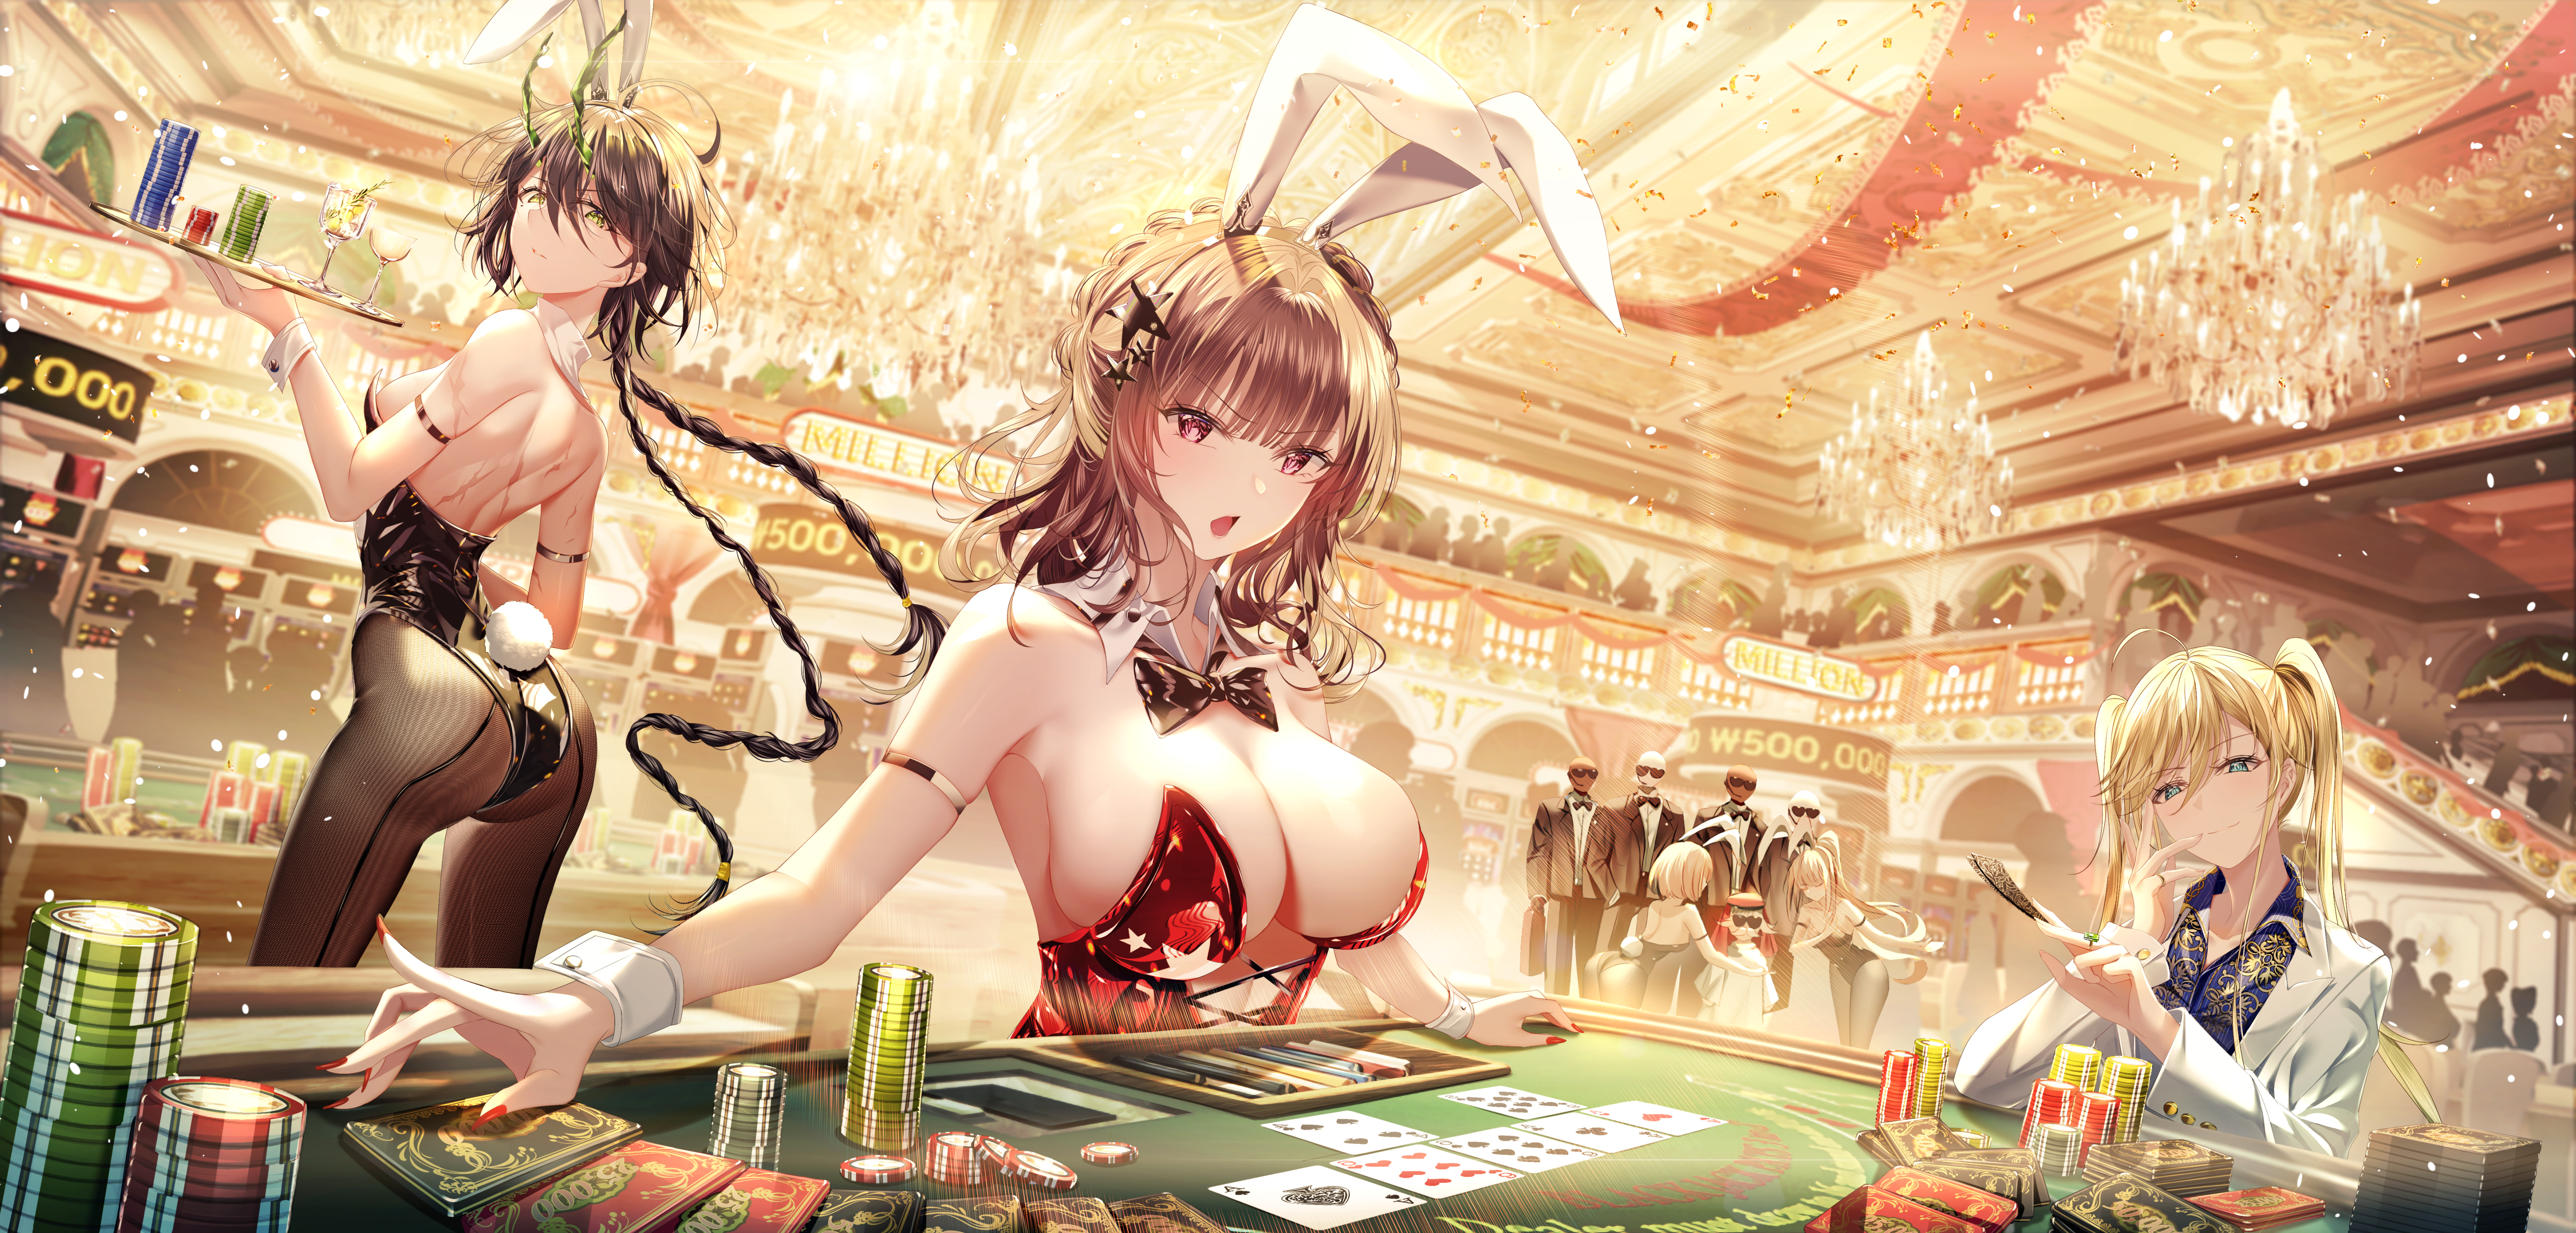 Anime 5875x2812 bunny girl bunny ears bunny suit big boobs anime girls casino bunny tail bow tie ass fishnet pantyhose poker chips cards twintails braids looking at viewer chandeliers poker bareback long hair anime